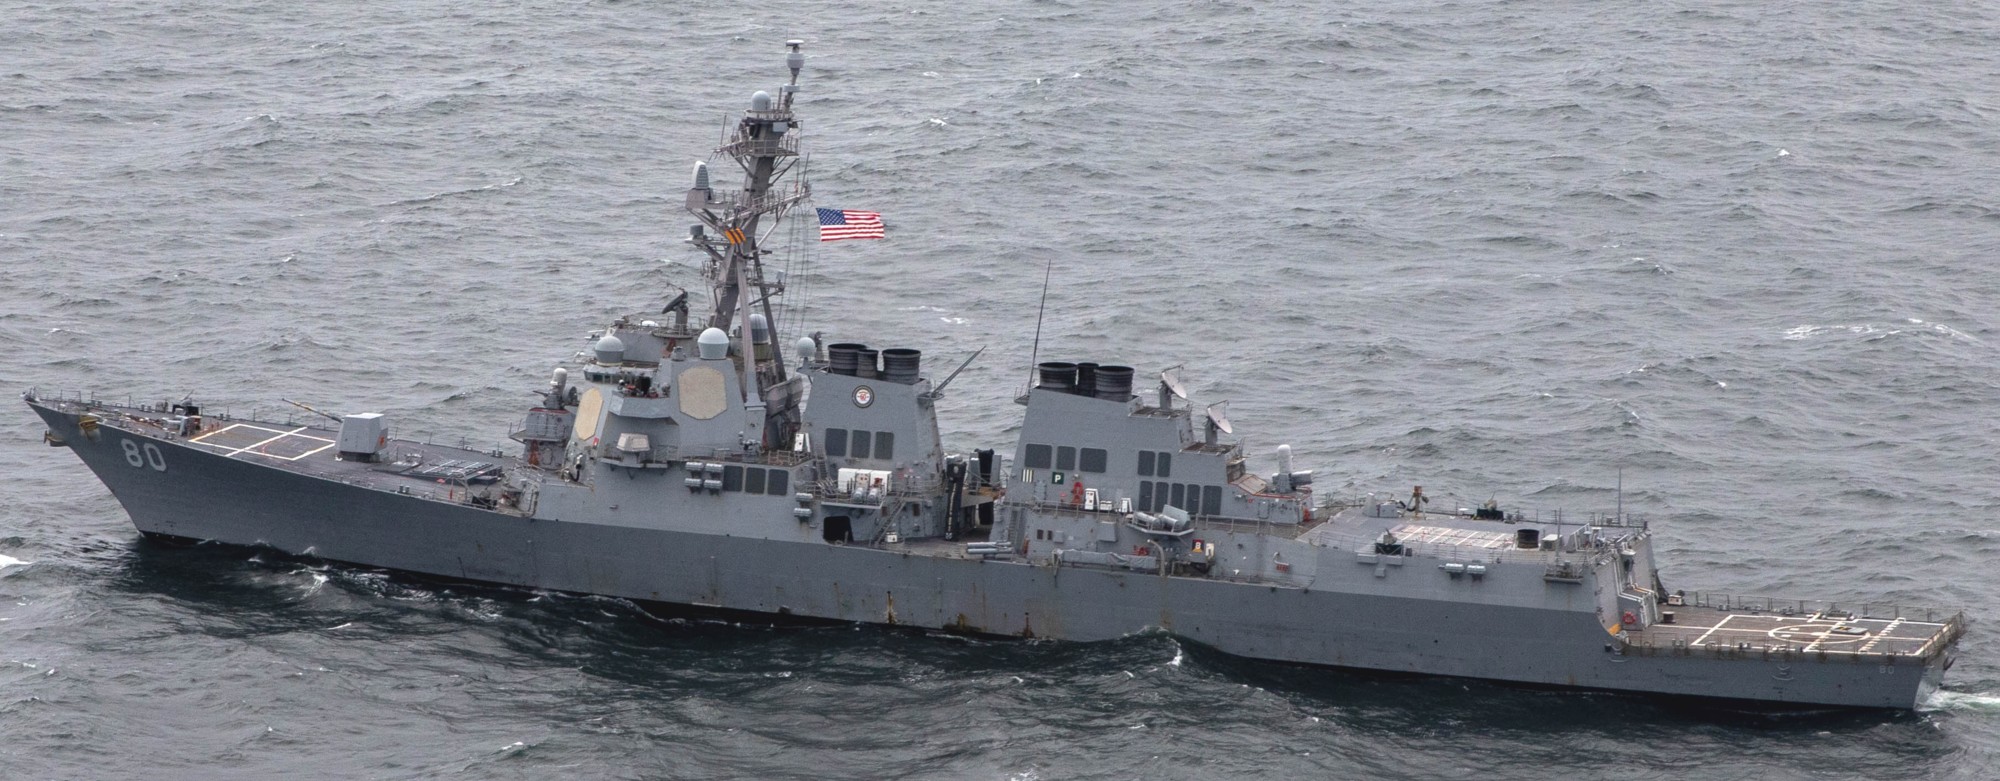 ddg-80 uss roosevelt guided missile destroyer arleigh burke class us navy baltic sea 2023 93